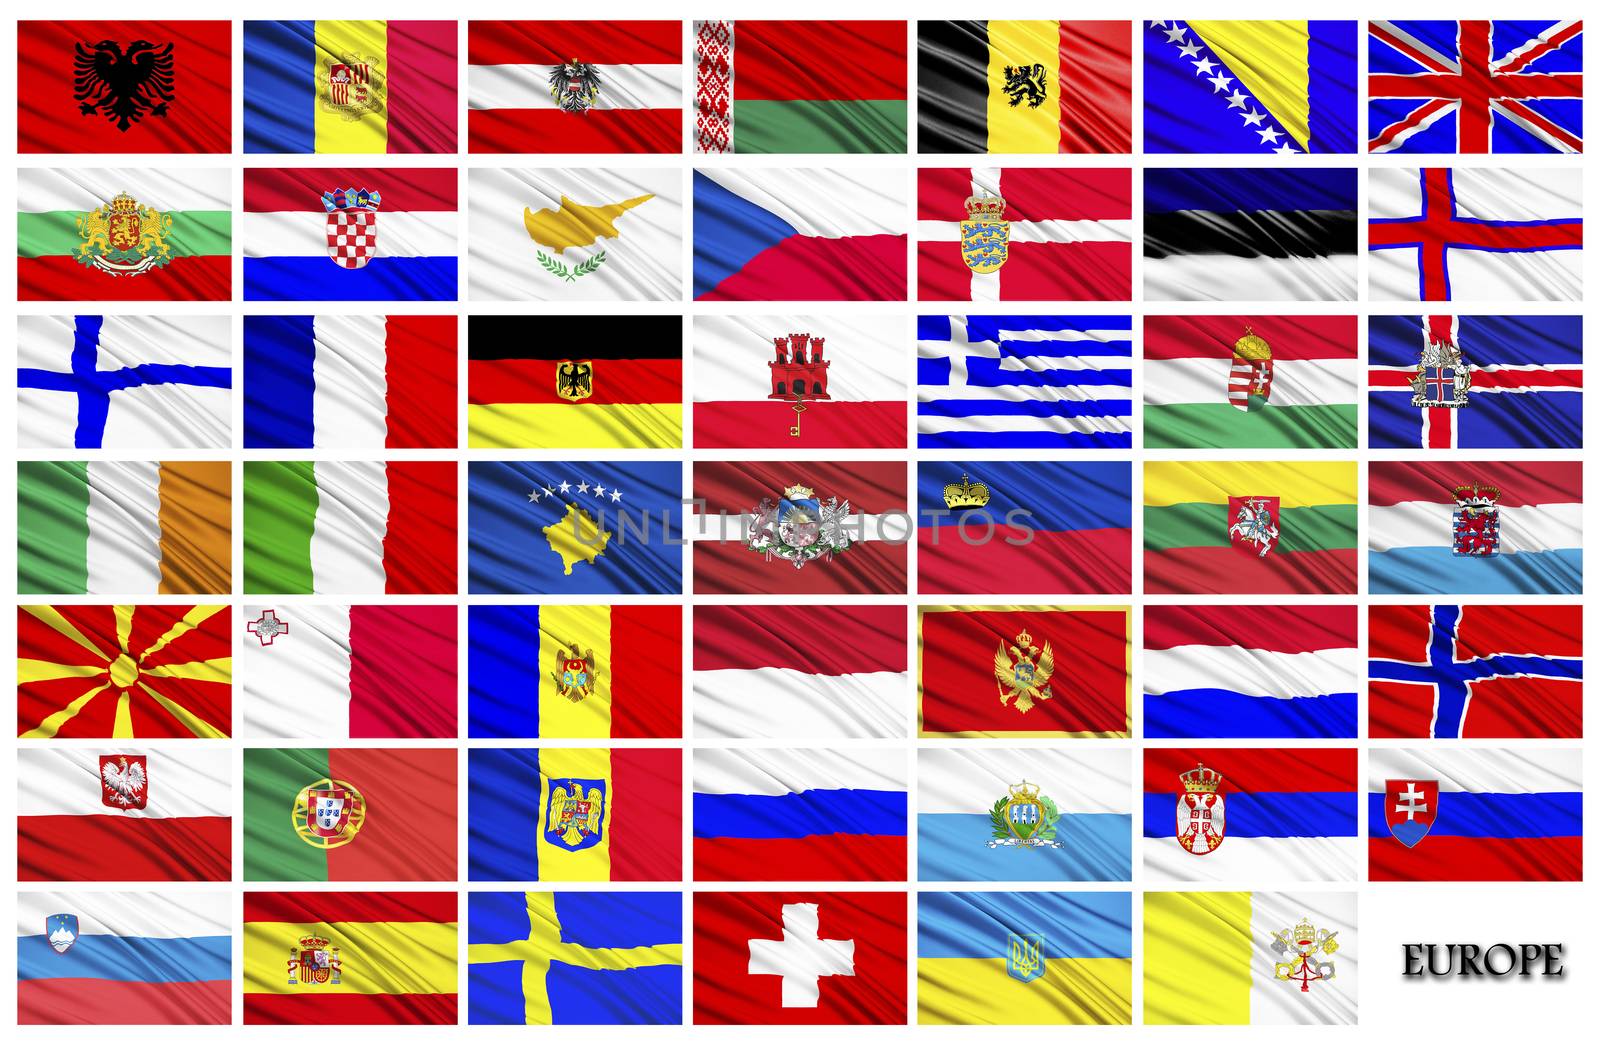 Flags of European countries in alphabetical order